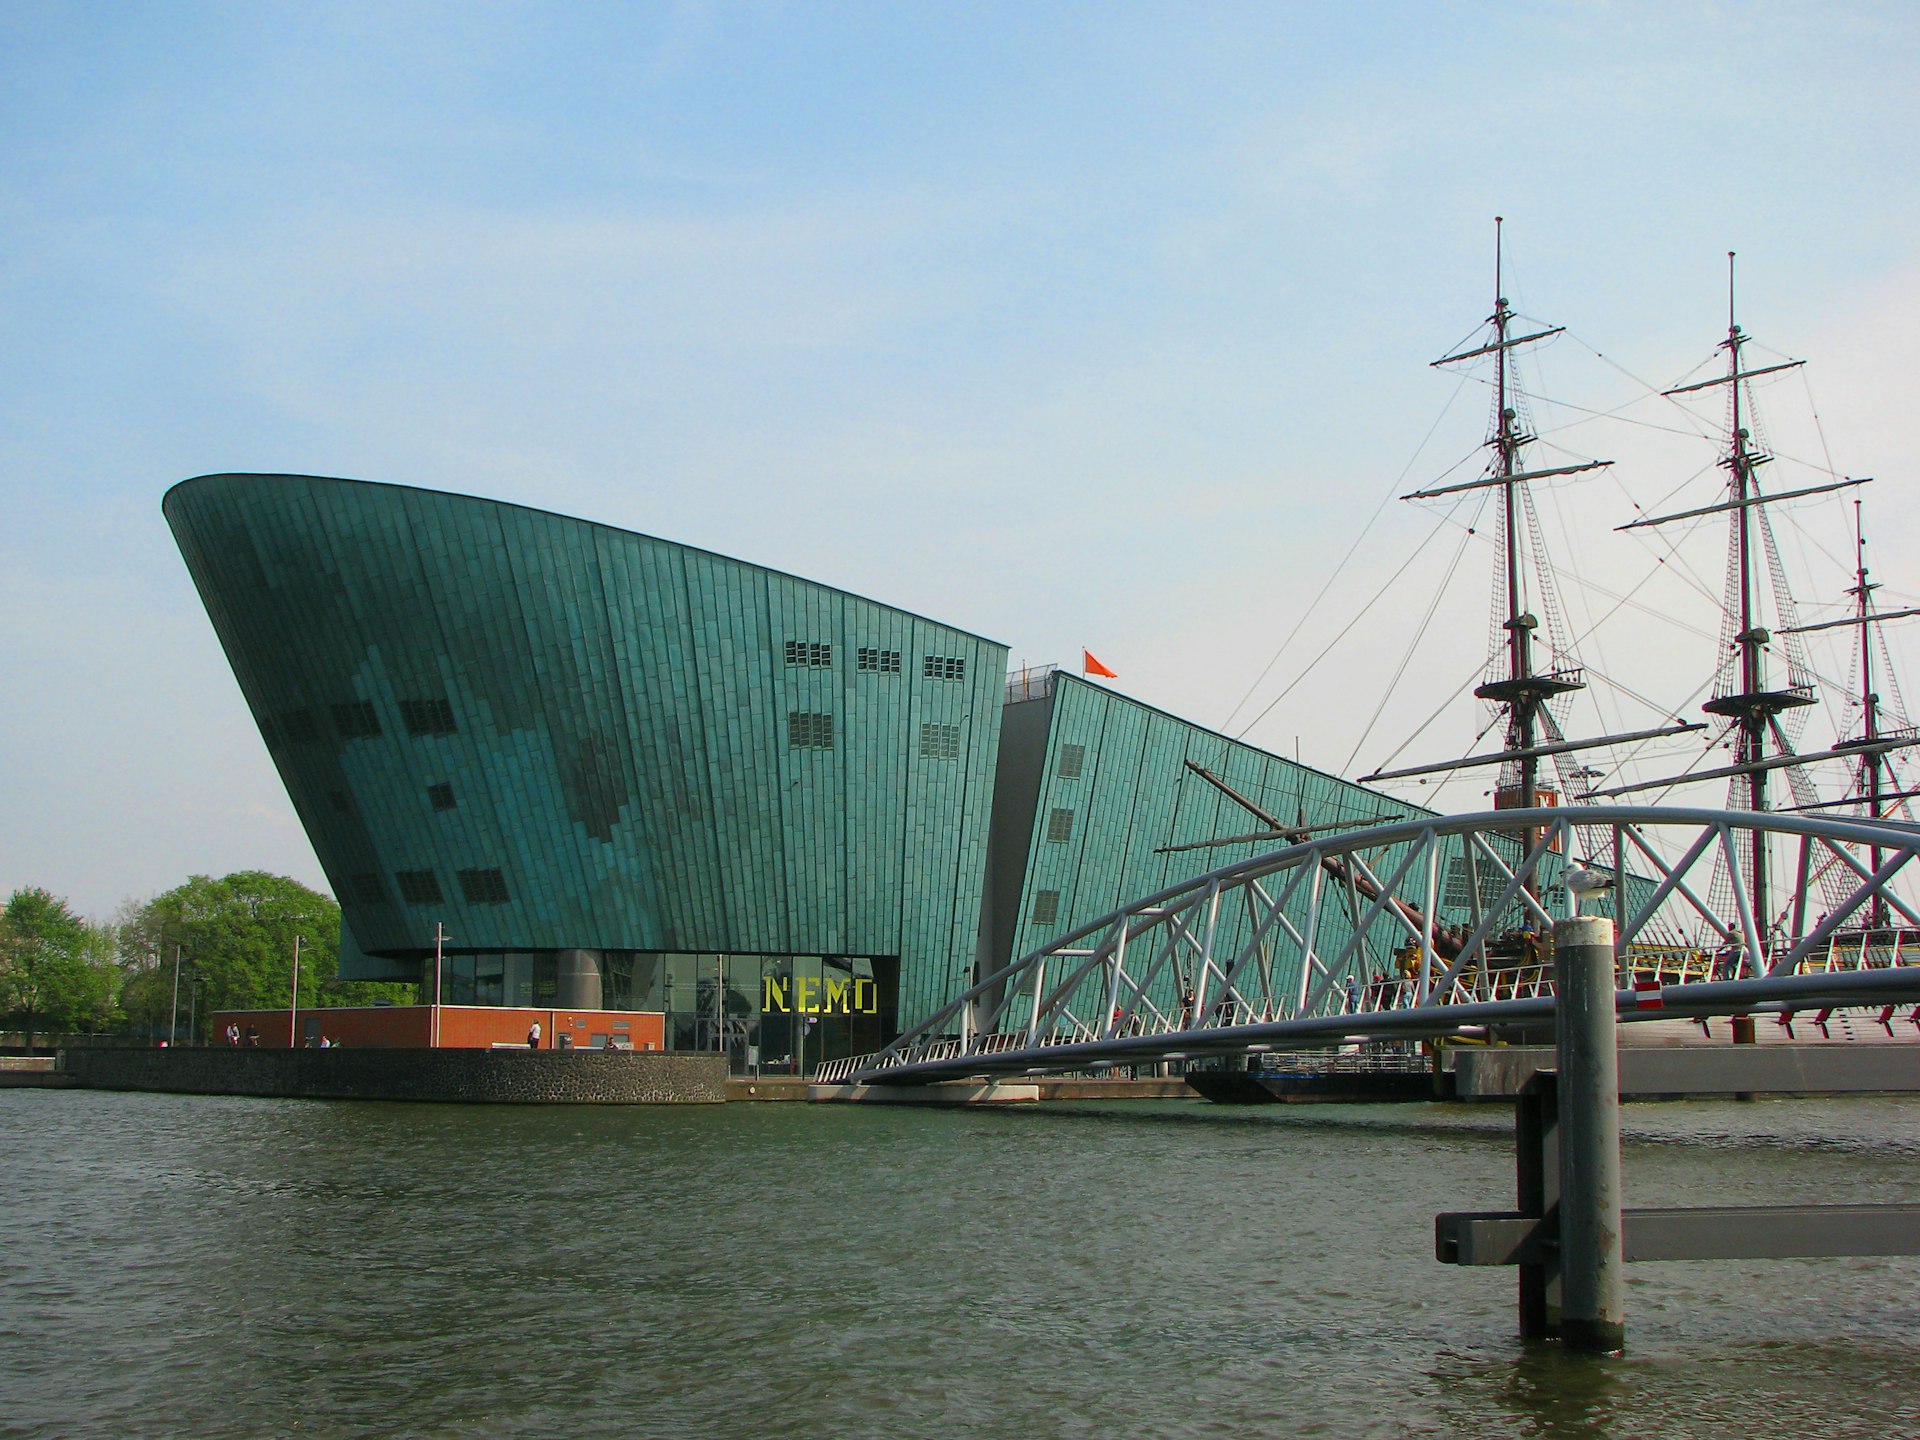 A large green copper hull-like building at the edge of the water